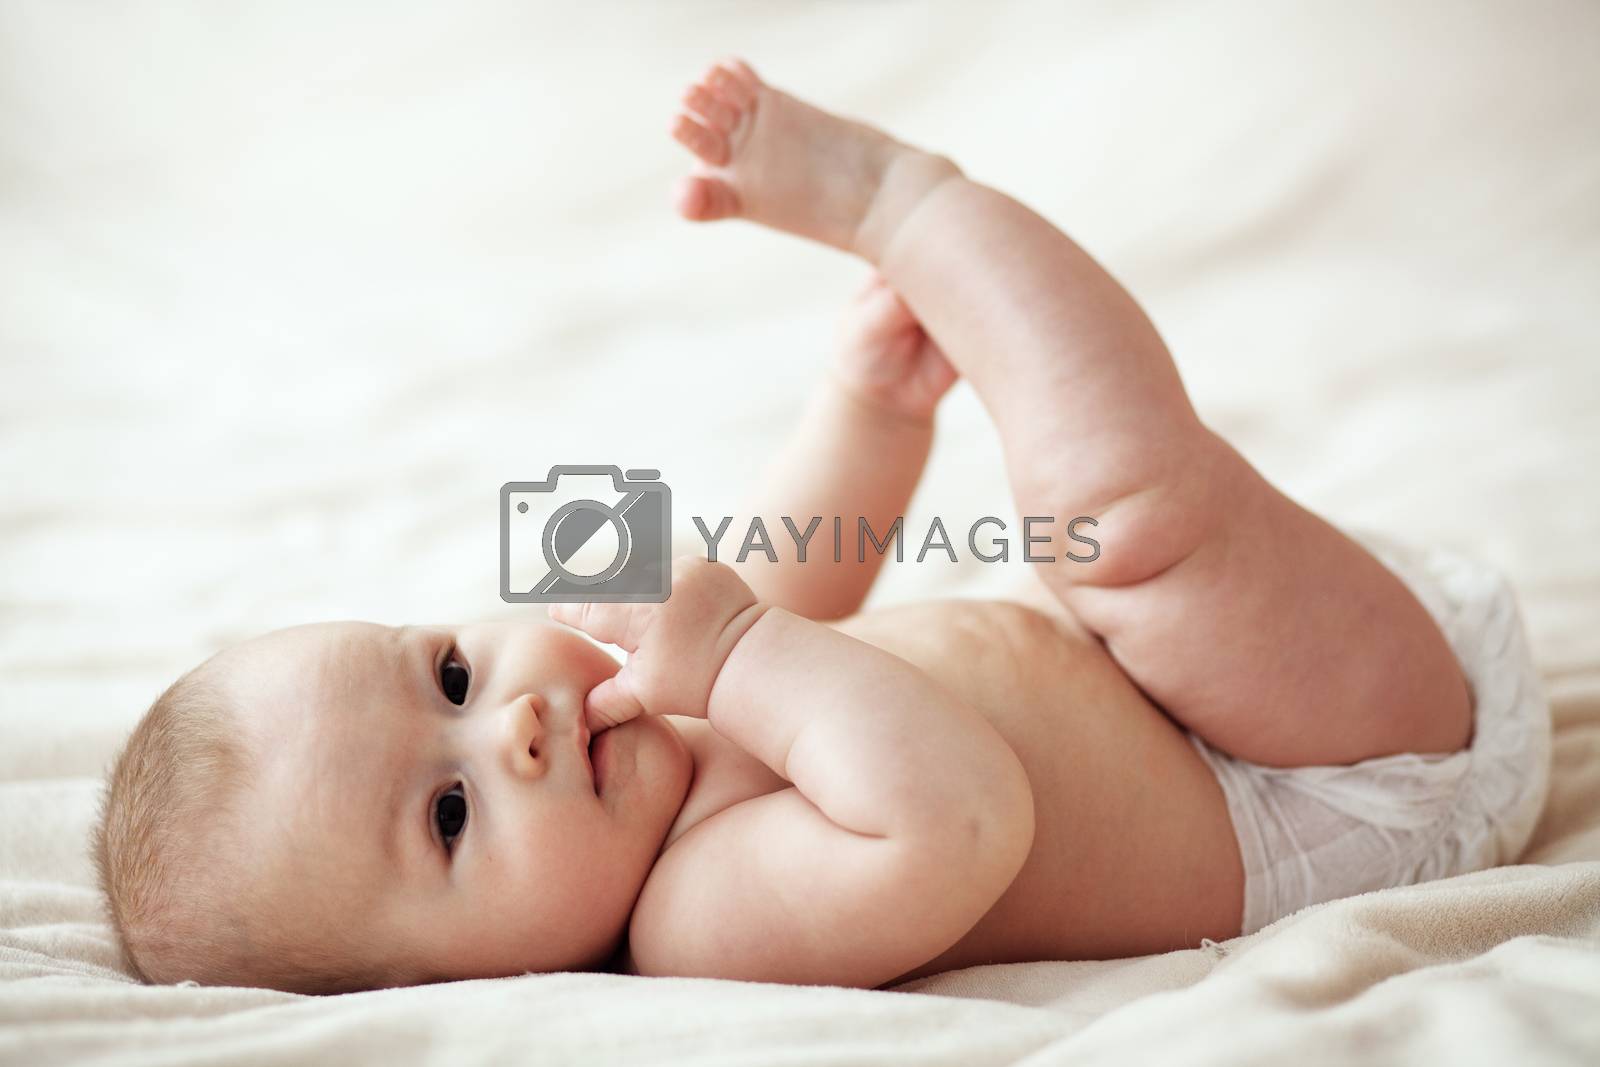 Royalty free image of Baby by alenkasm